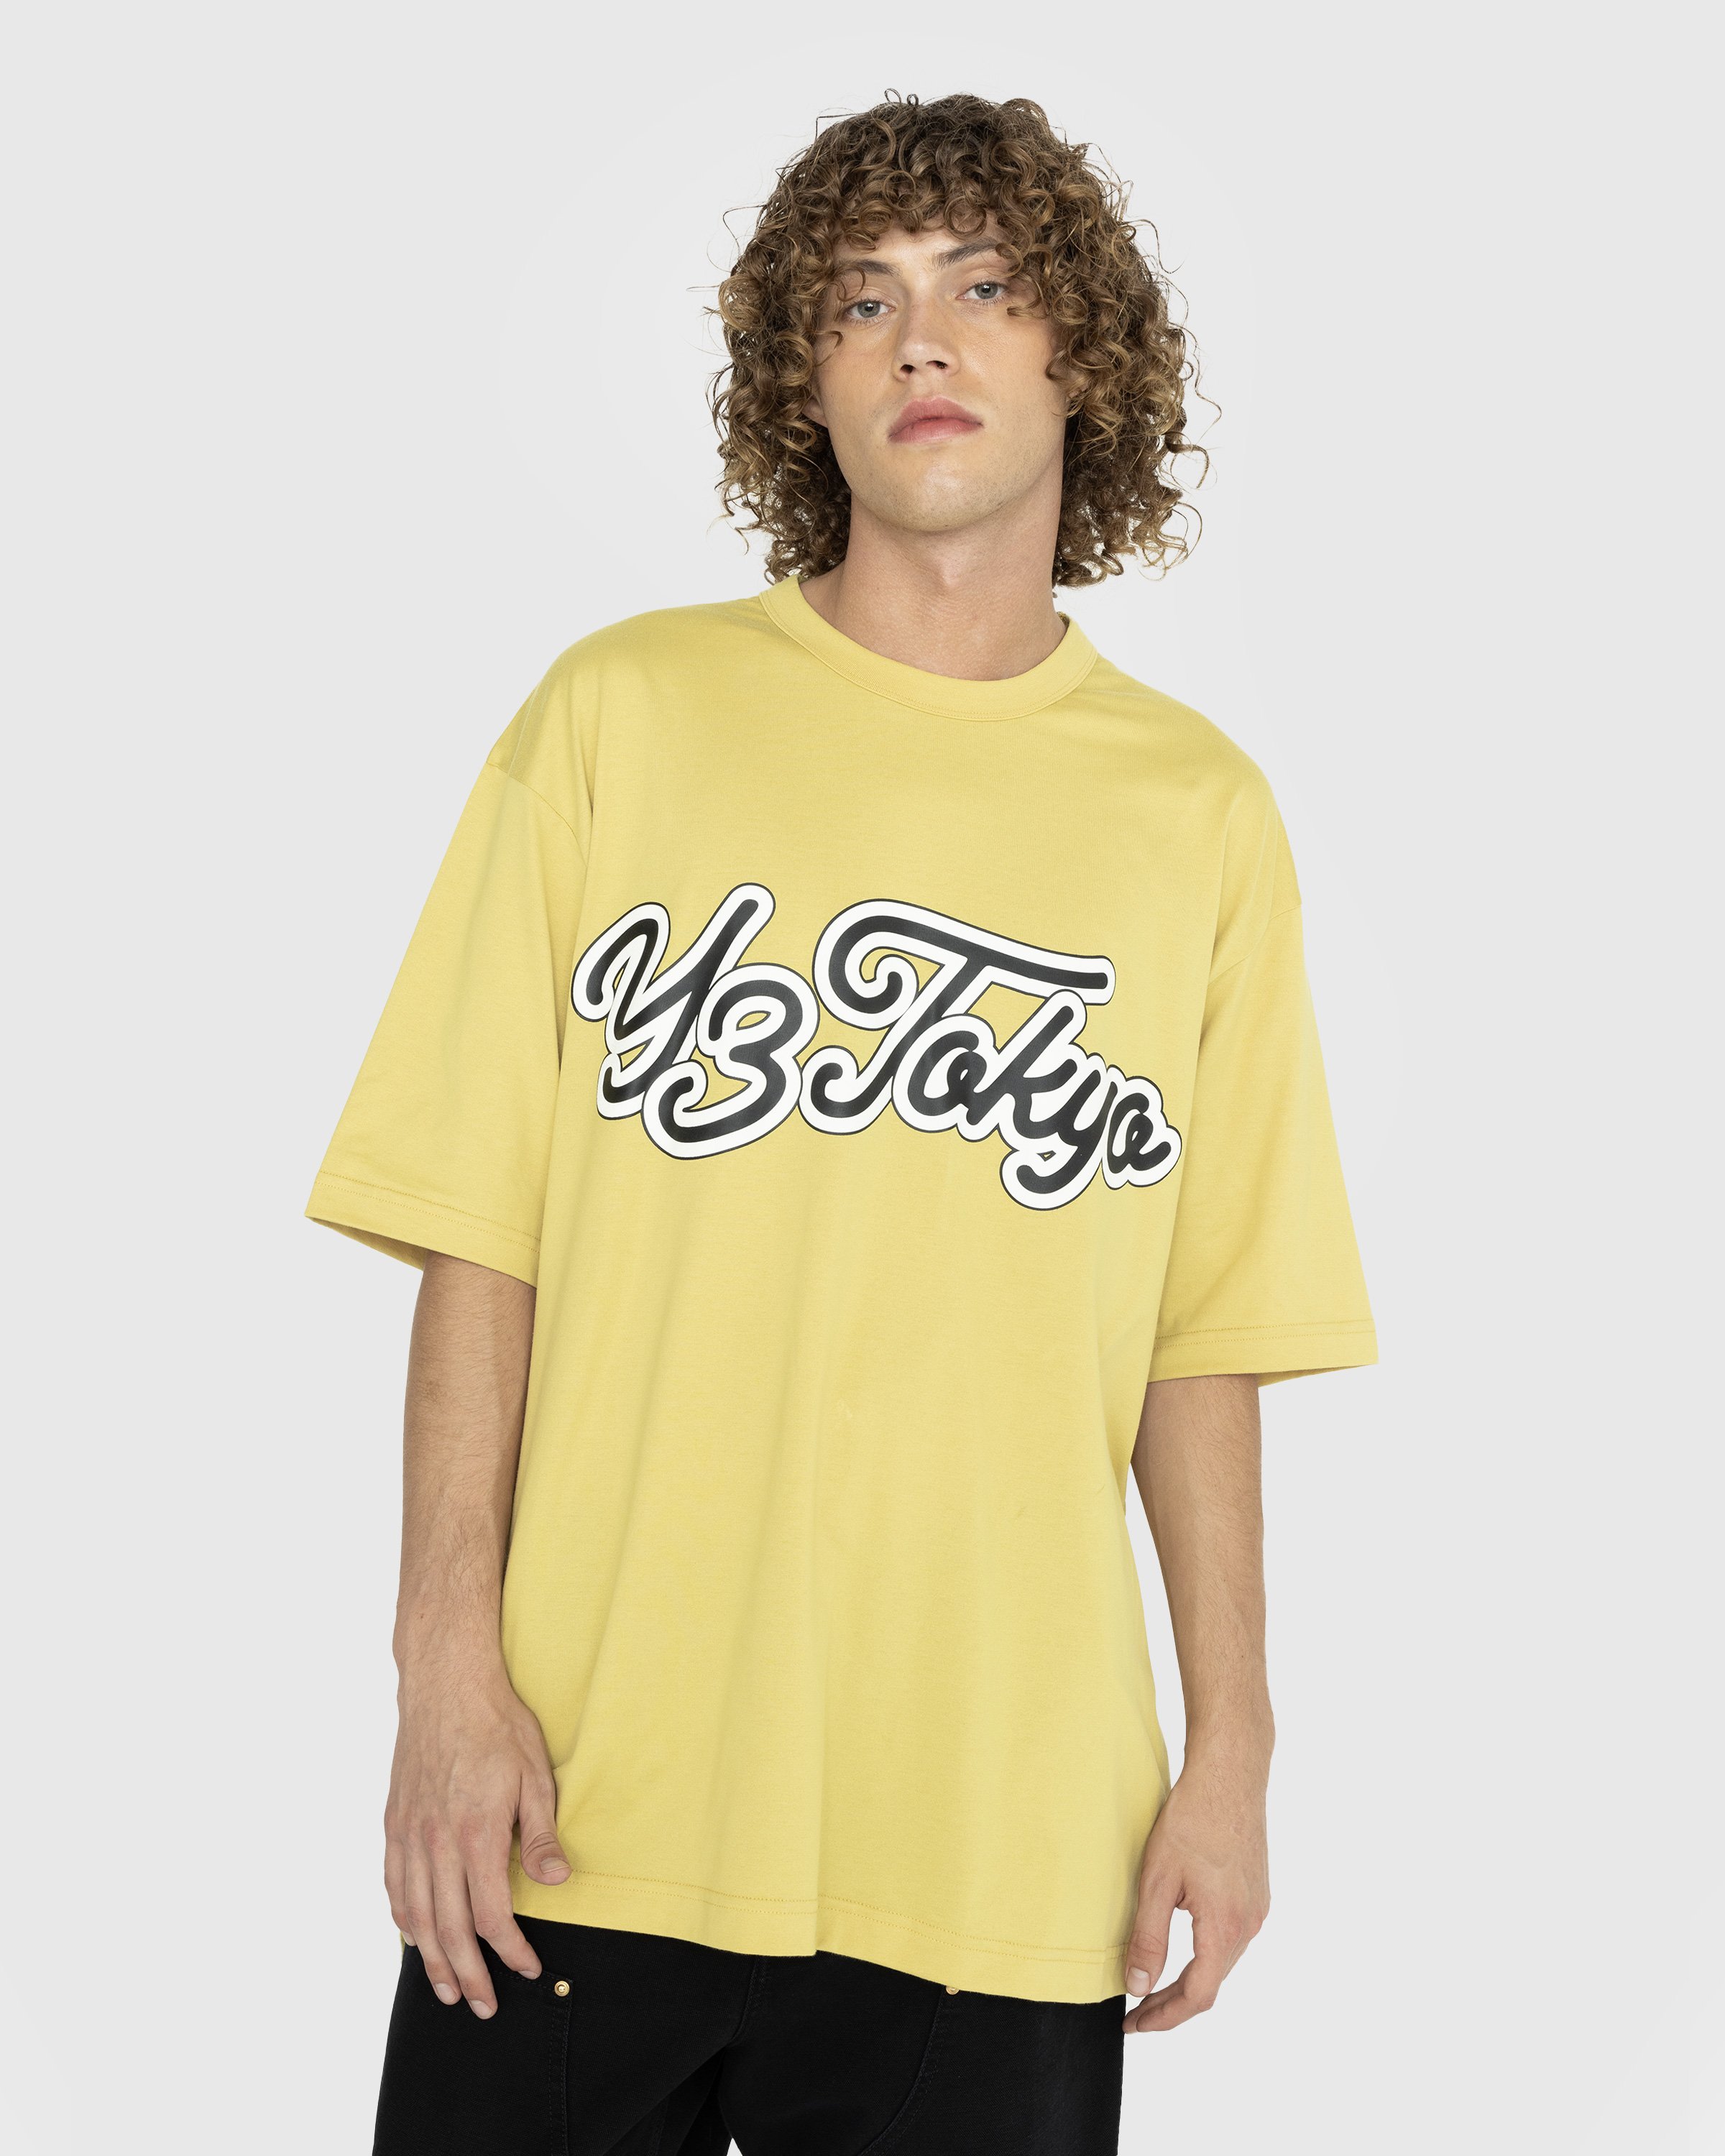 Y-3 - Tokyo T-Shirt Blanch Yellow - Clothing - Yellow - Image 2